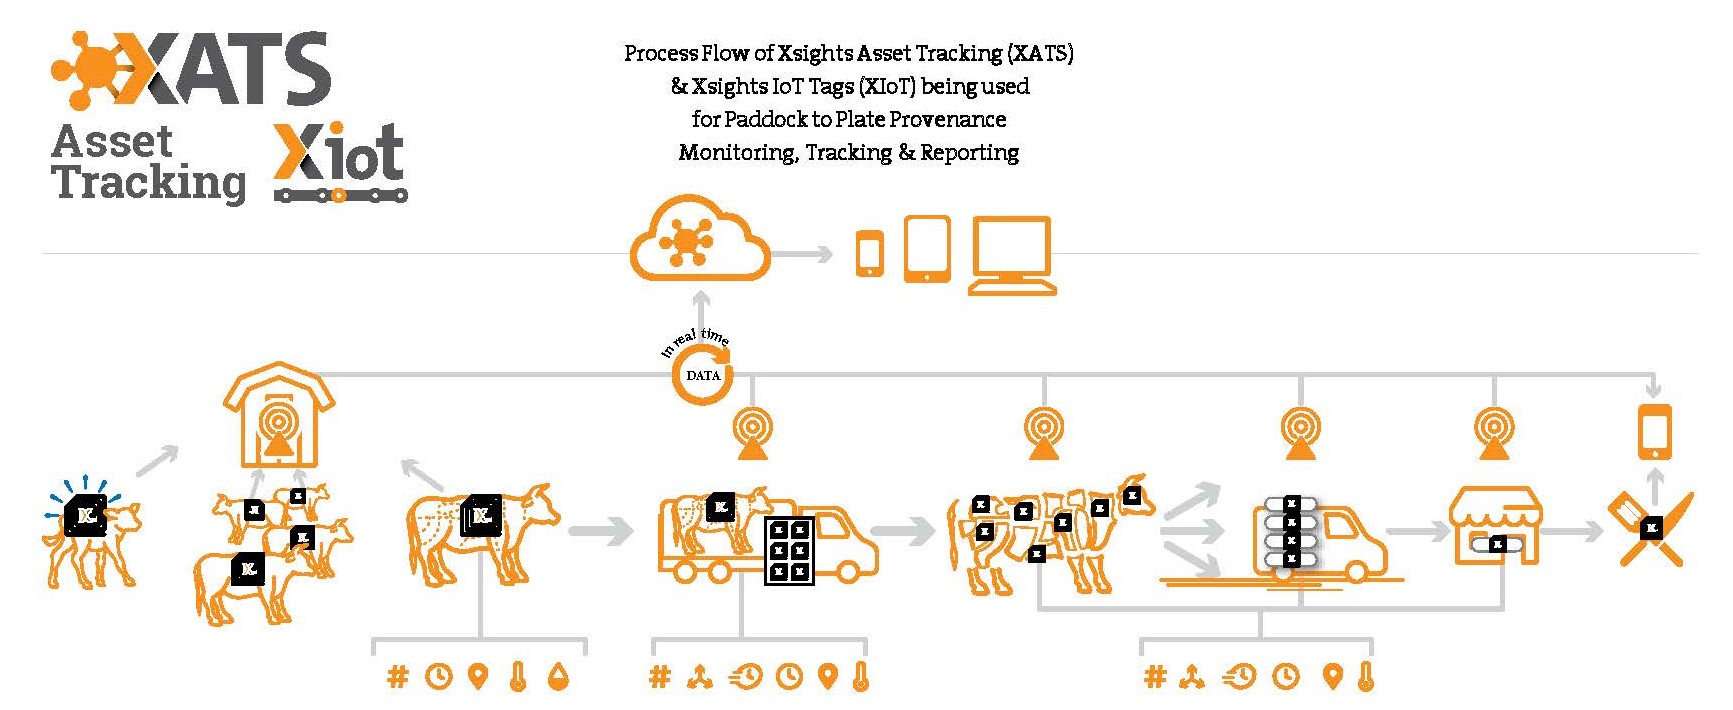 Process Flow of Xsights Asset Tracking (XATS) & Xsights IoT Tags (XIoT) being used for Paddock to Plate Provenance Monitoring, Tracking & Reporting